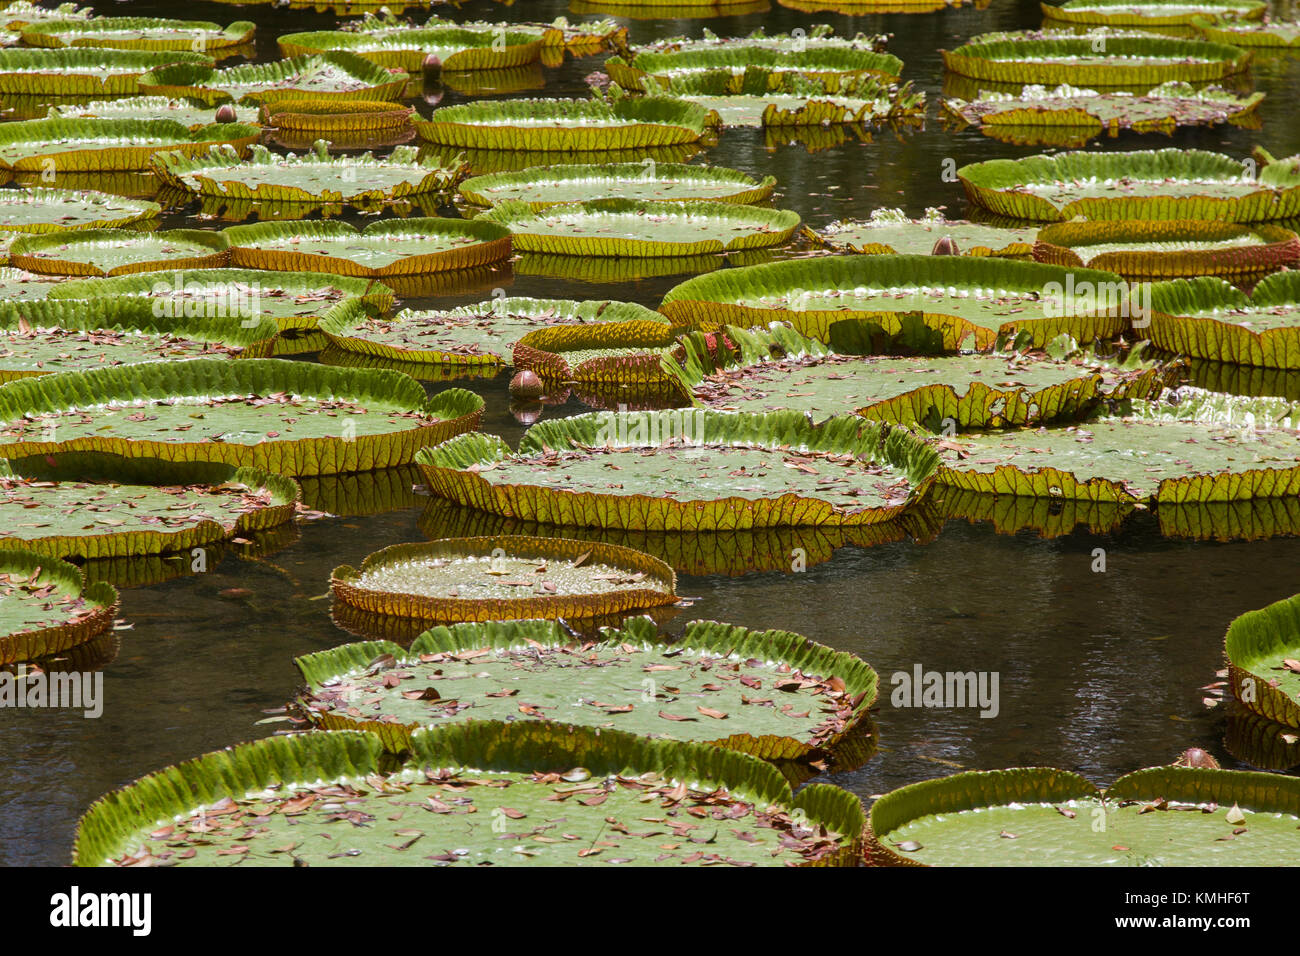 Giant water lilies in the Botanical Garden in Pamplemousses in Mauritius, Africa. Stock Photo